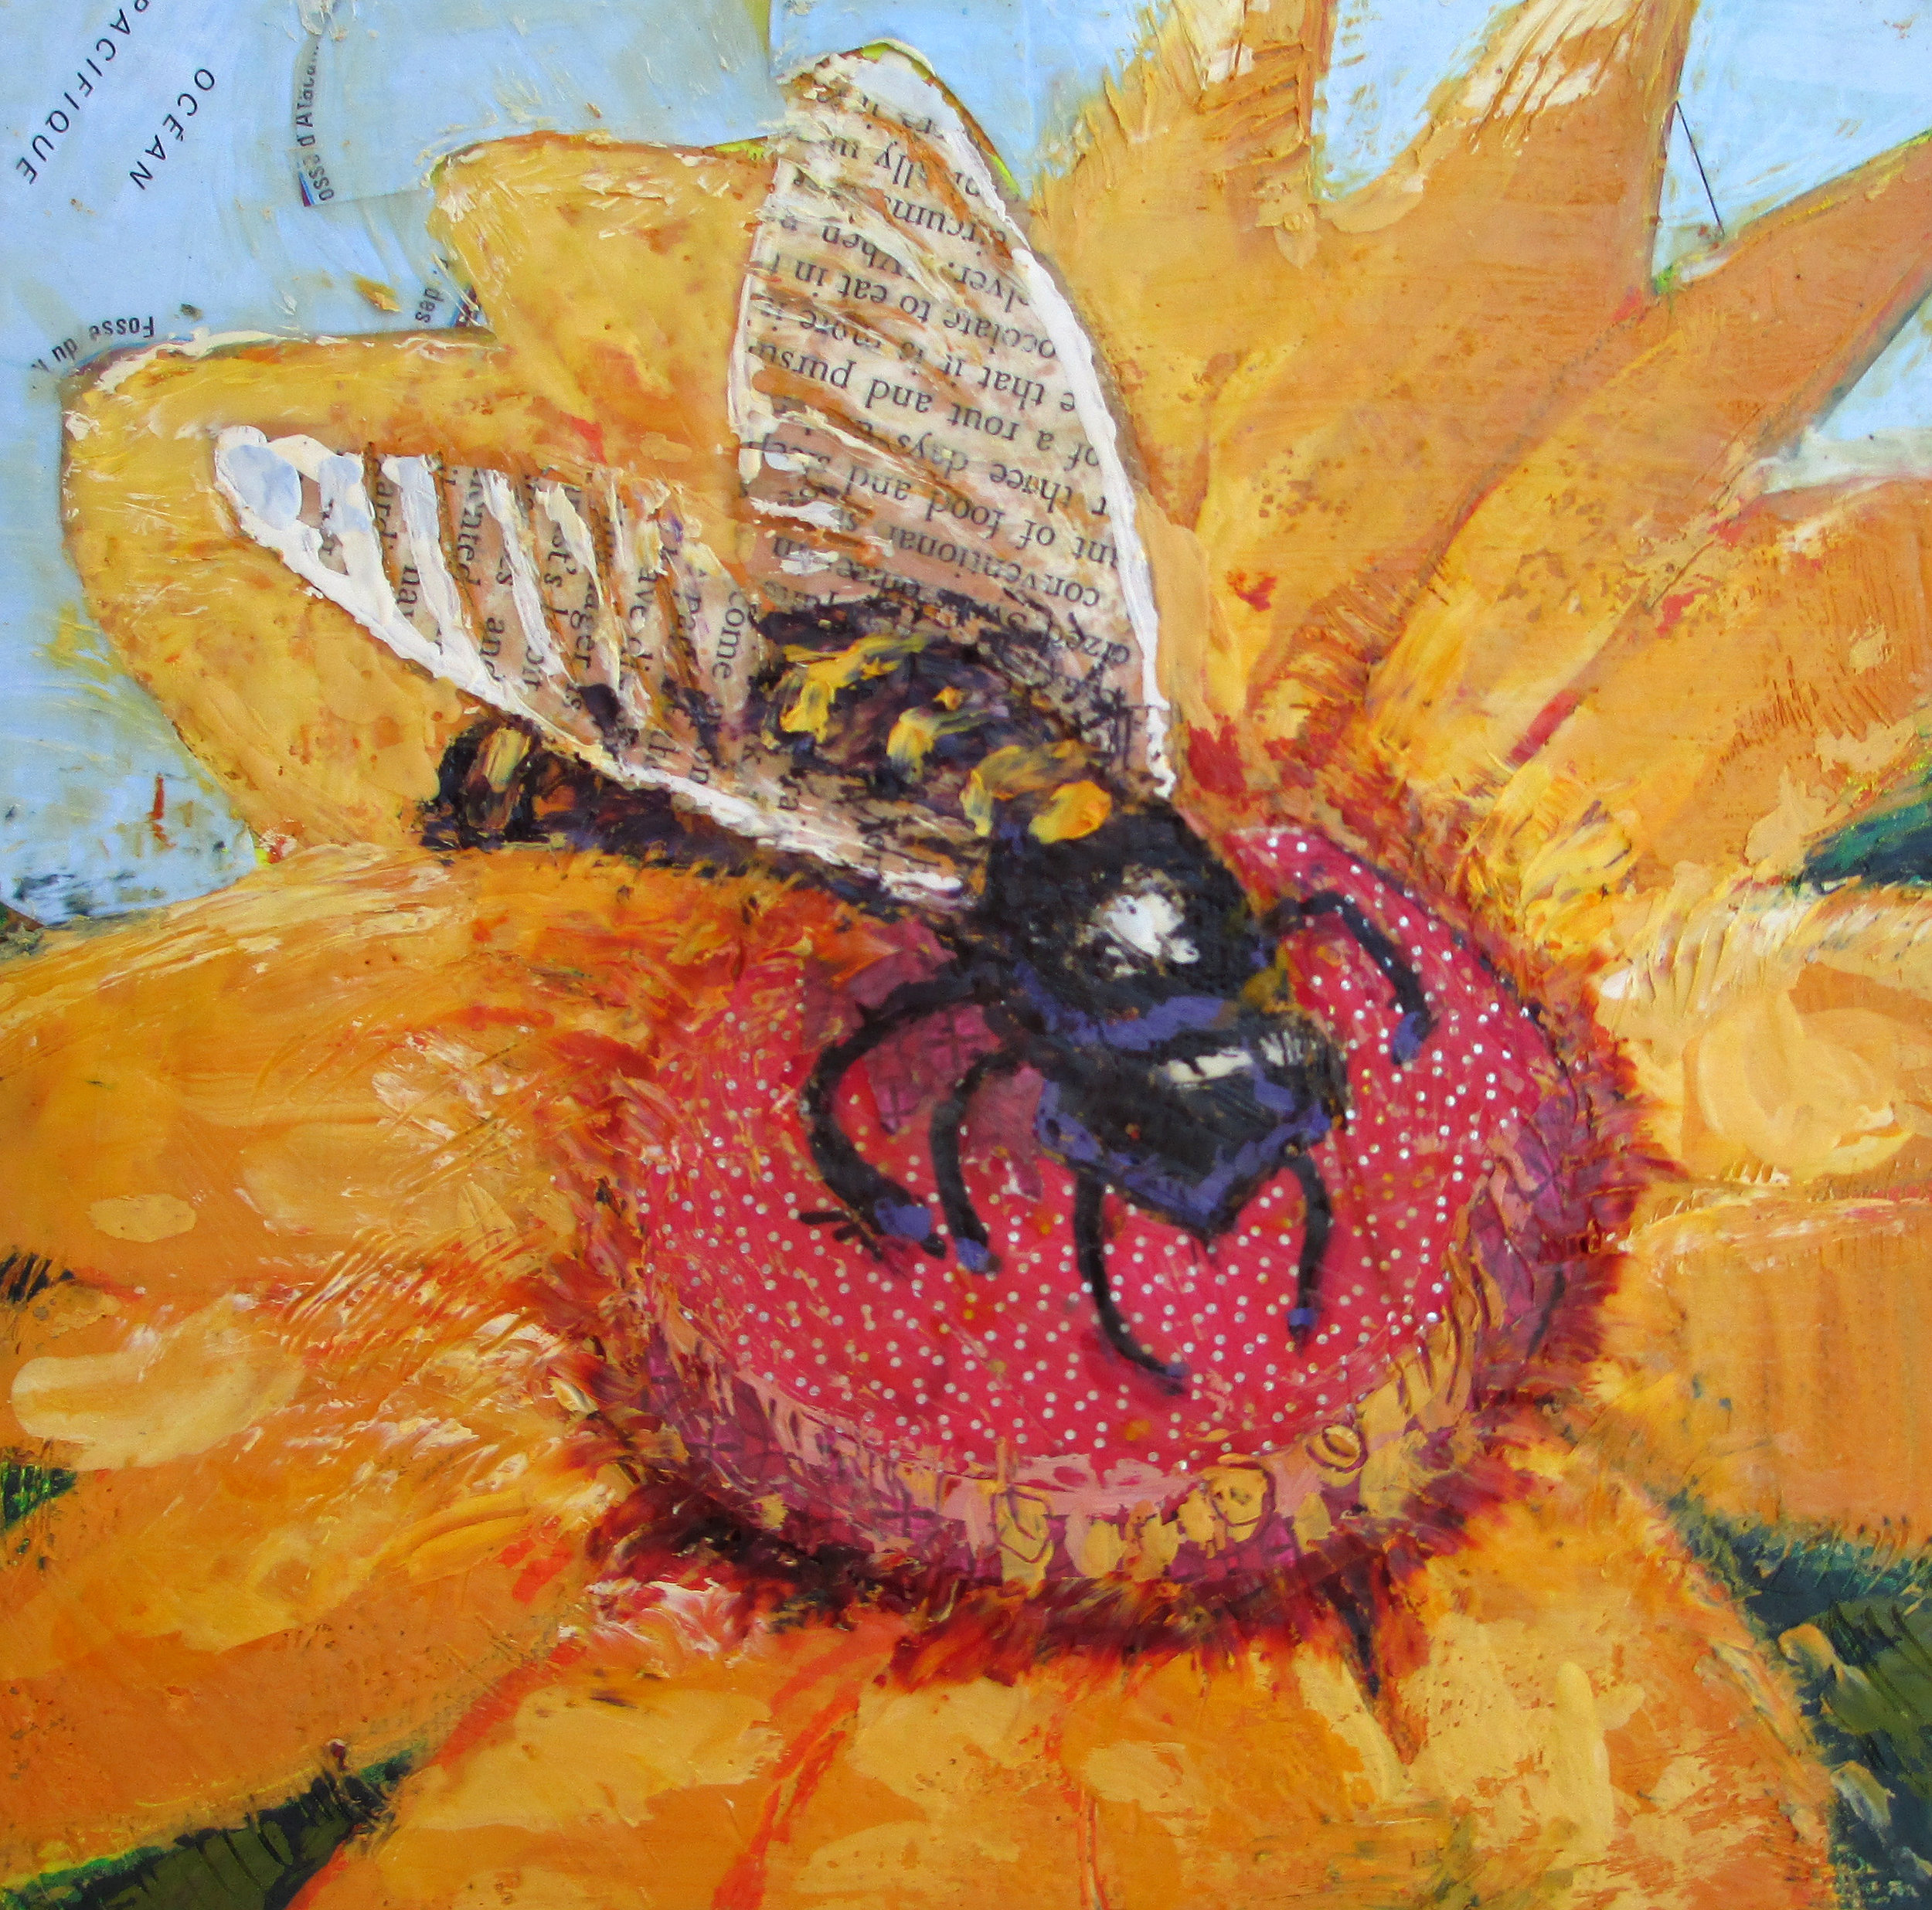 McMillan mixed media and collage Bee on the Map  6 x 6 inches encaustic and collage.jpg